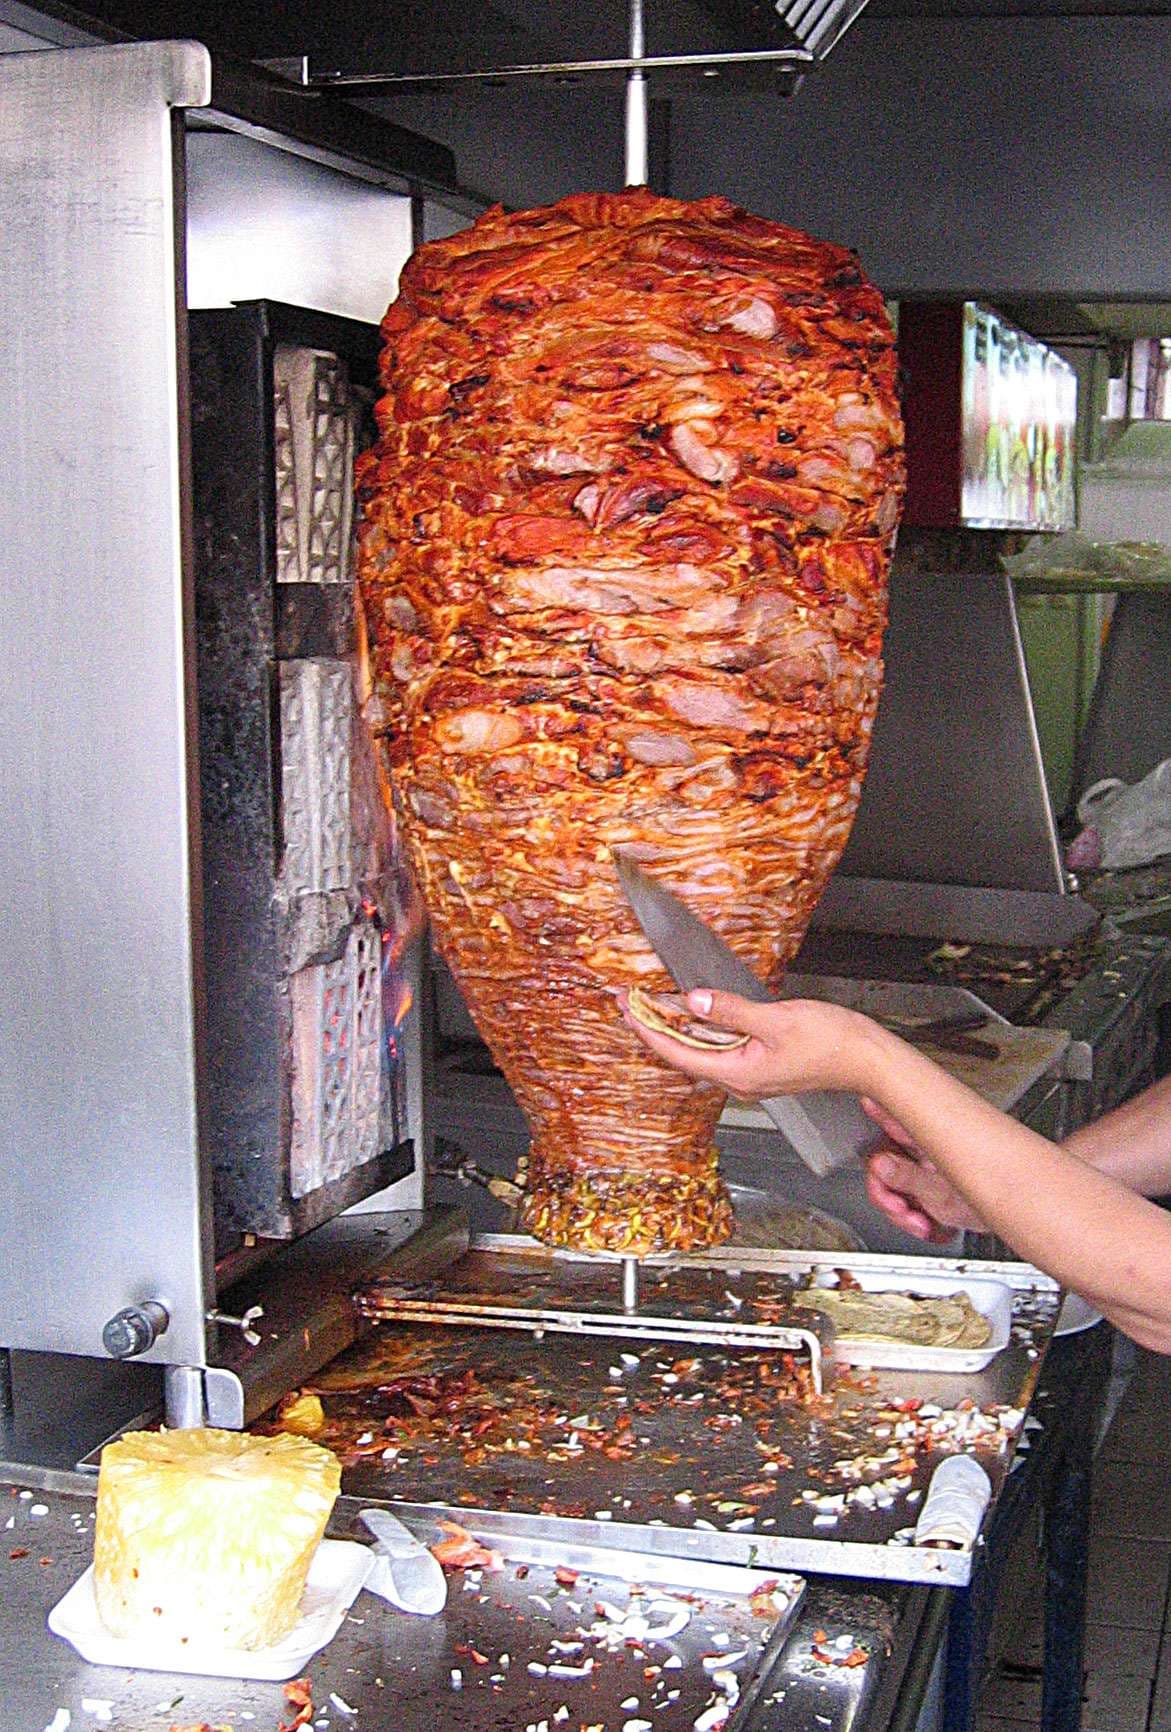 Tacos al Pastor being cut from the spit (uncropped version visible on Flickr) Date 22 May 2006 Source Own work Author Matt Saunders